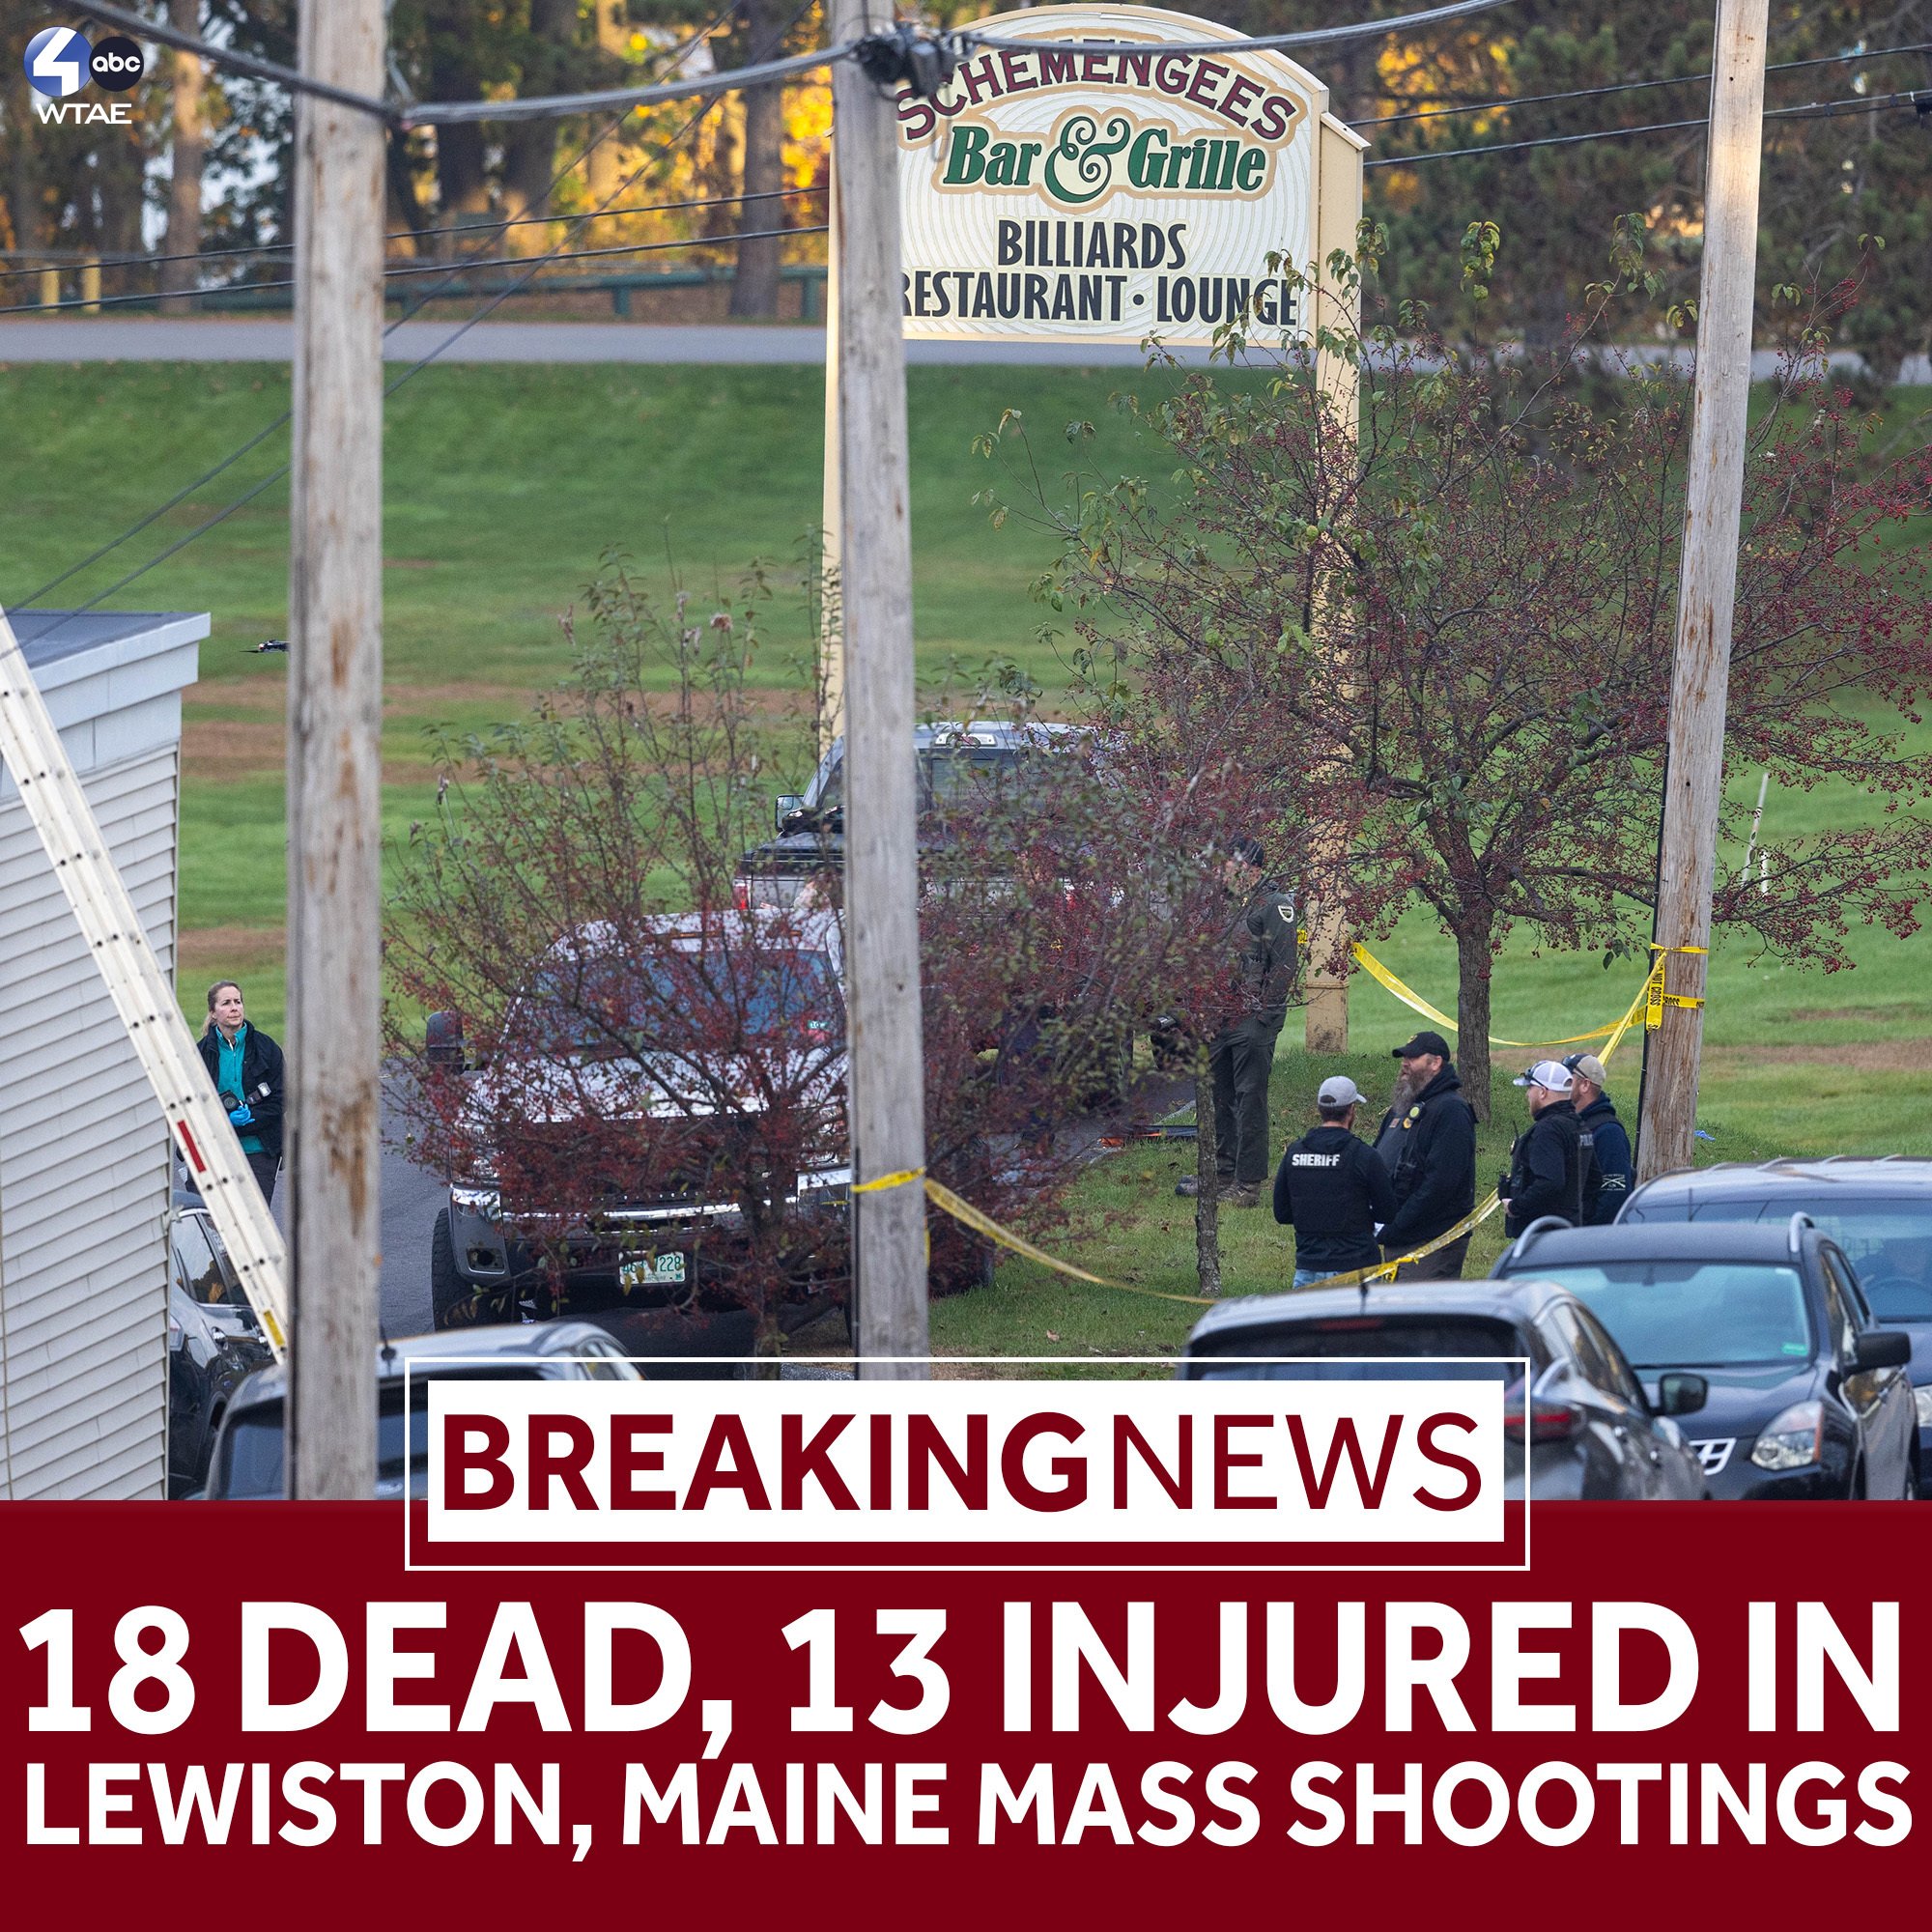 WTAE-TV
                                                          Pittsburgh on
                                                          X: Two mass
                                                          shootings in
                                                          Lewiston,
                                                          Maine, have
                                                          left 18 people
                                                          dead and
                                                          injured 13
                                                          other people,
                                                          Gov. Janet
                                                          Mills
                                                          announced at a
                                                          press
                                                          conference on
                                                          Thursday |
                                                          LATEST